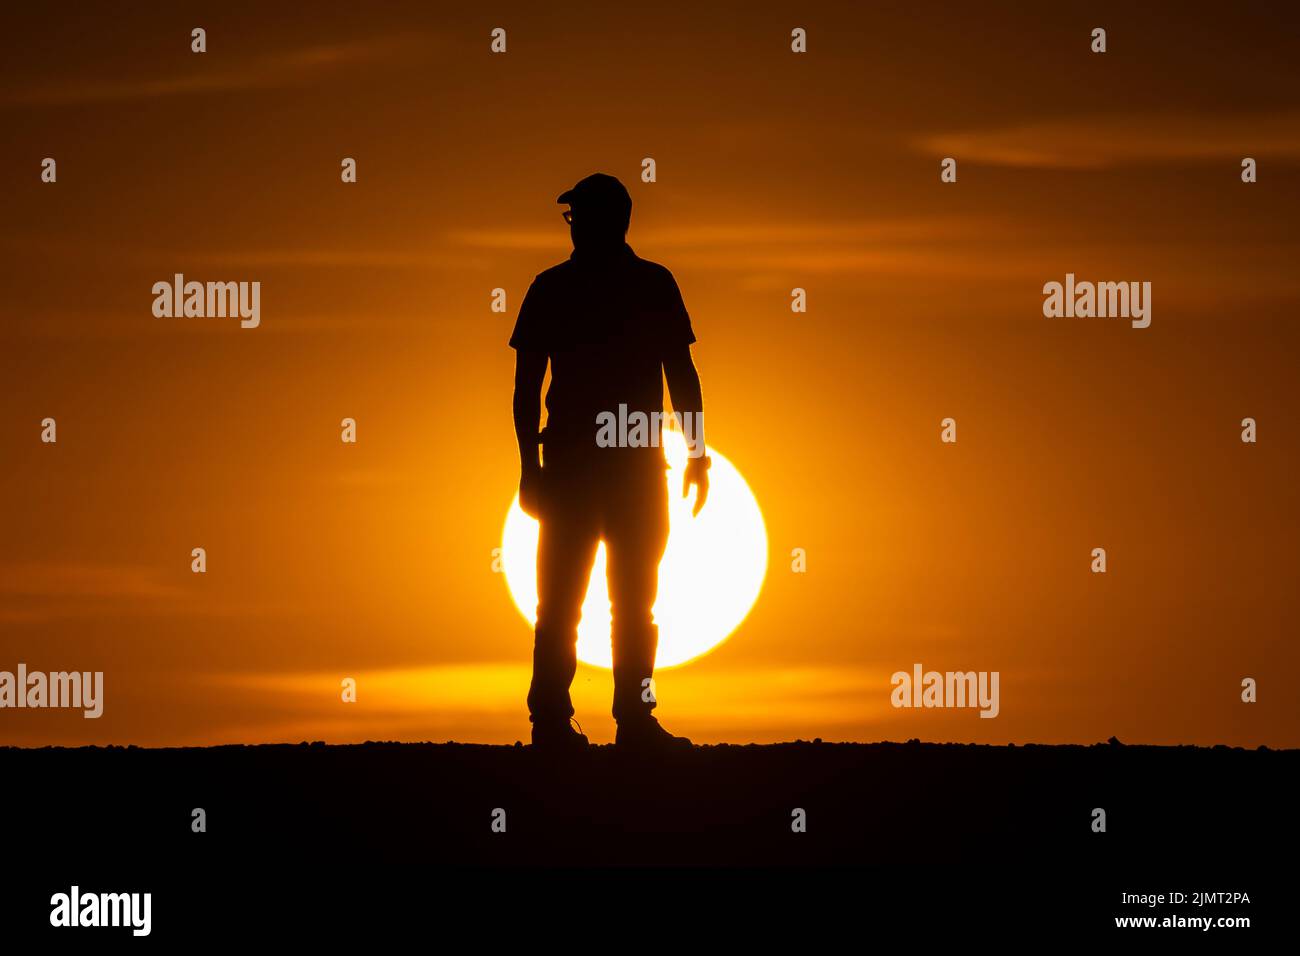 London, UK.  7 August 2022.  UK Weather – A man views the sunset at Northala Fields near Northolt in west London.  According to the Met Office, July 2022 was the driest July for England since 1935.  Hose pipe bans are in place in certain areas as drought conditions continue, with temperatures exceeding 30C in the south expected next week. Credit: Stephen Chung / Alamy Live News Stock Photo